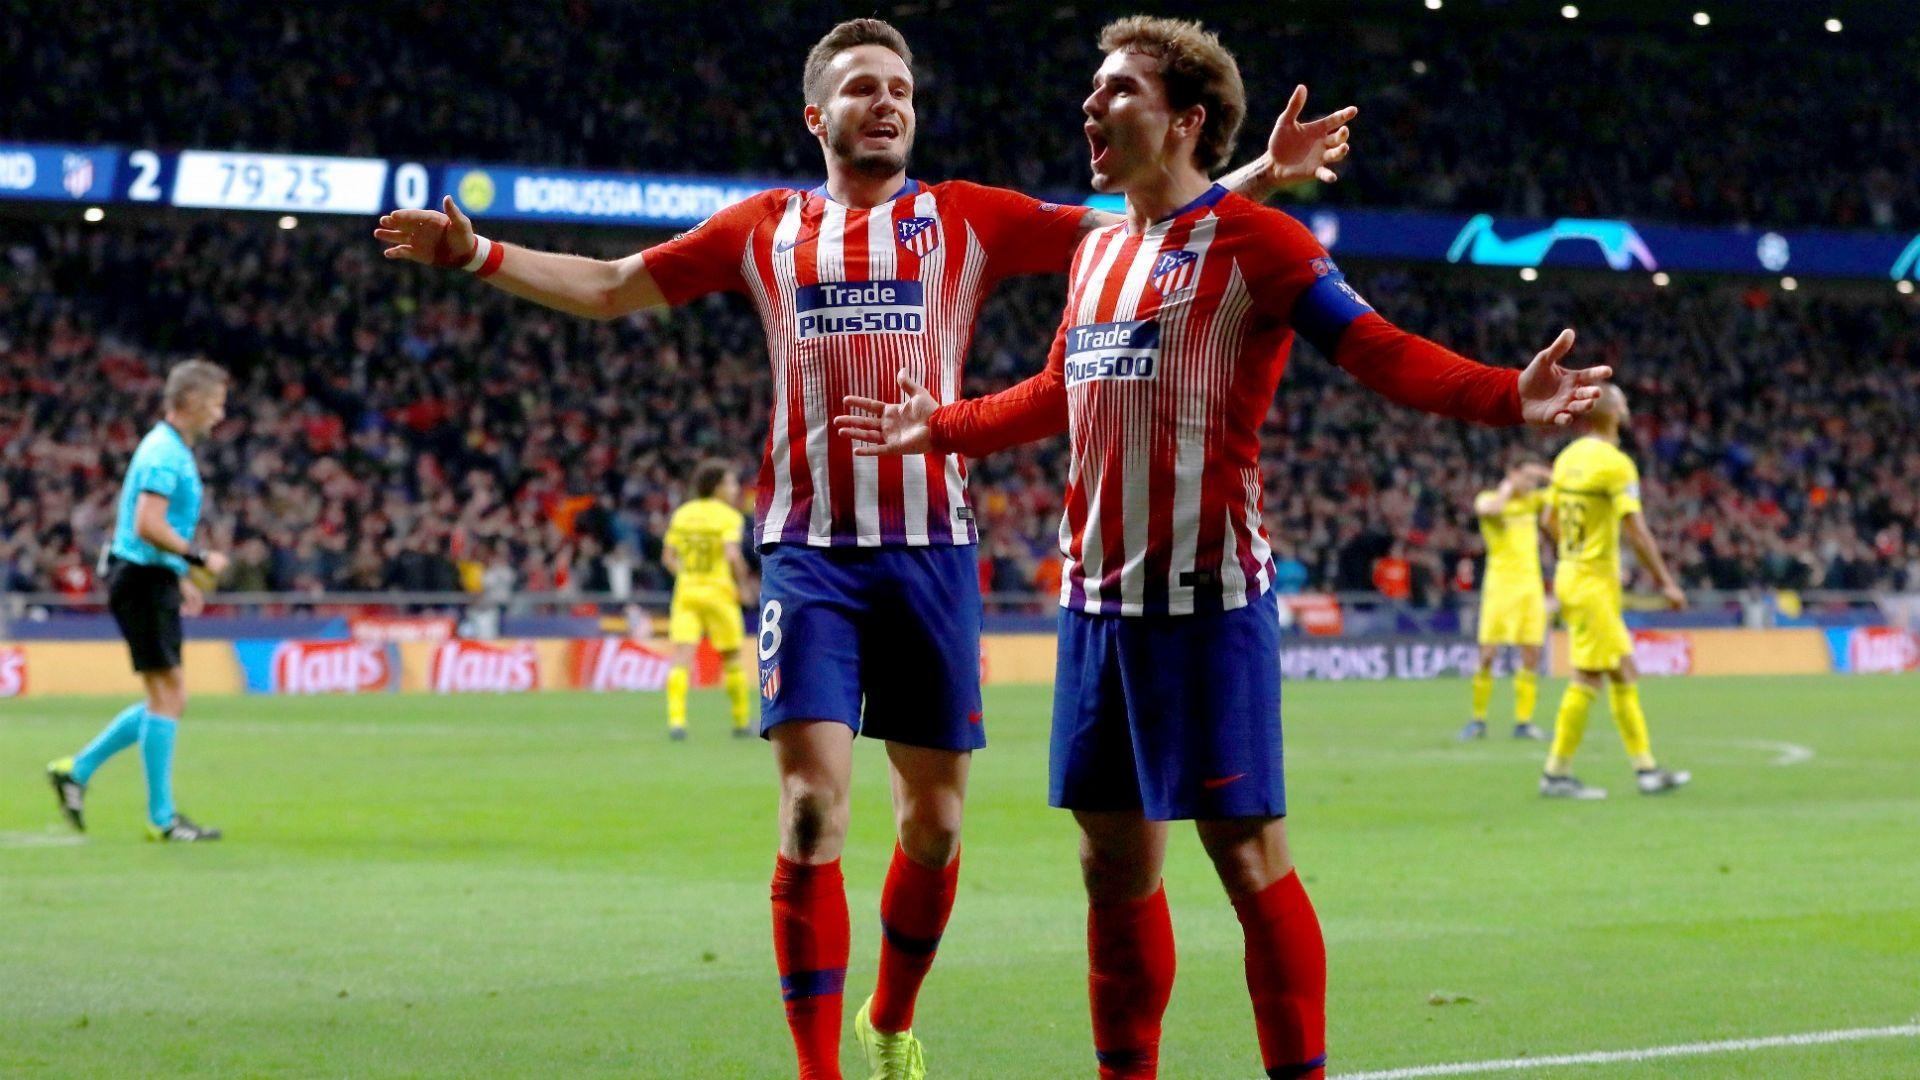 Griezmann: I am so pleased to play at Atletico Madrid